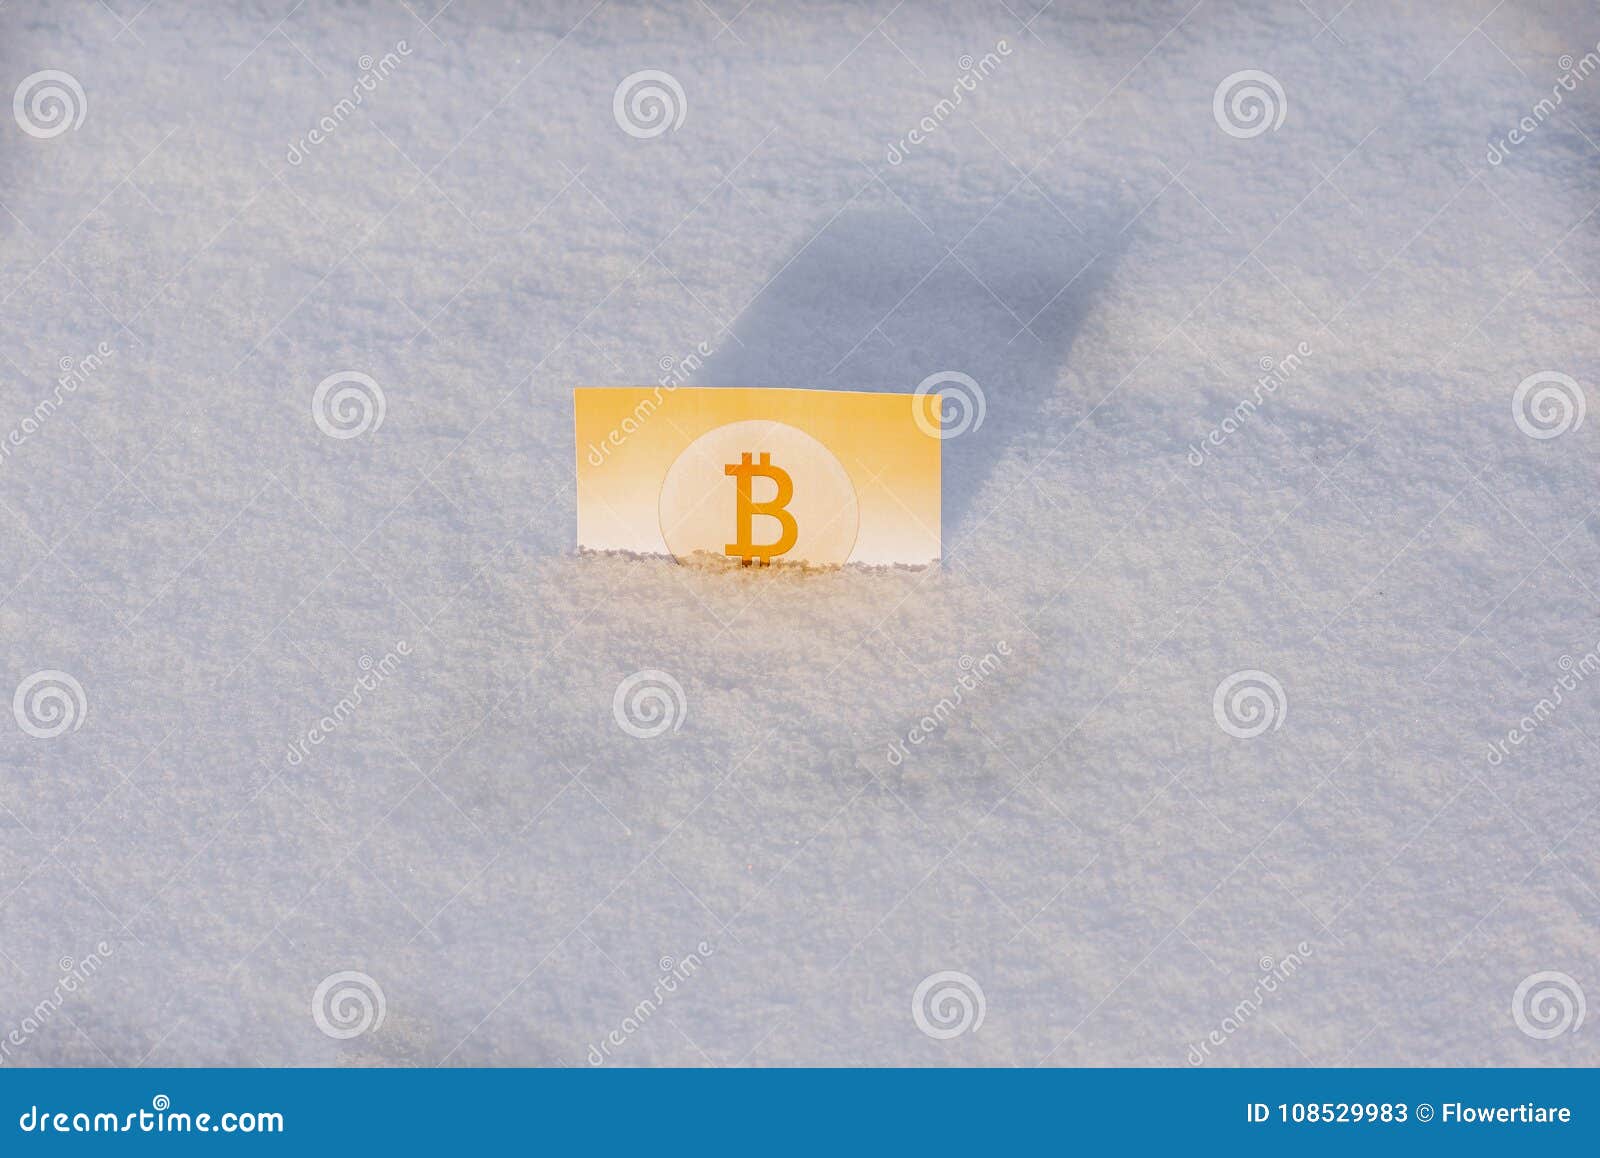 Paper Gold Money Bitcoin In The Snow In Winter. Frozen ...